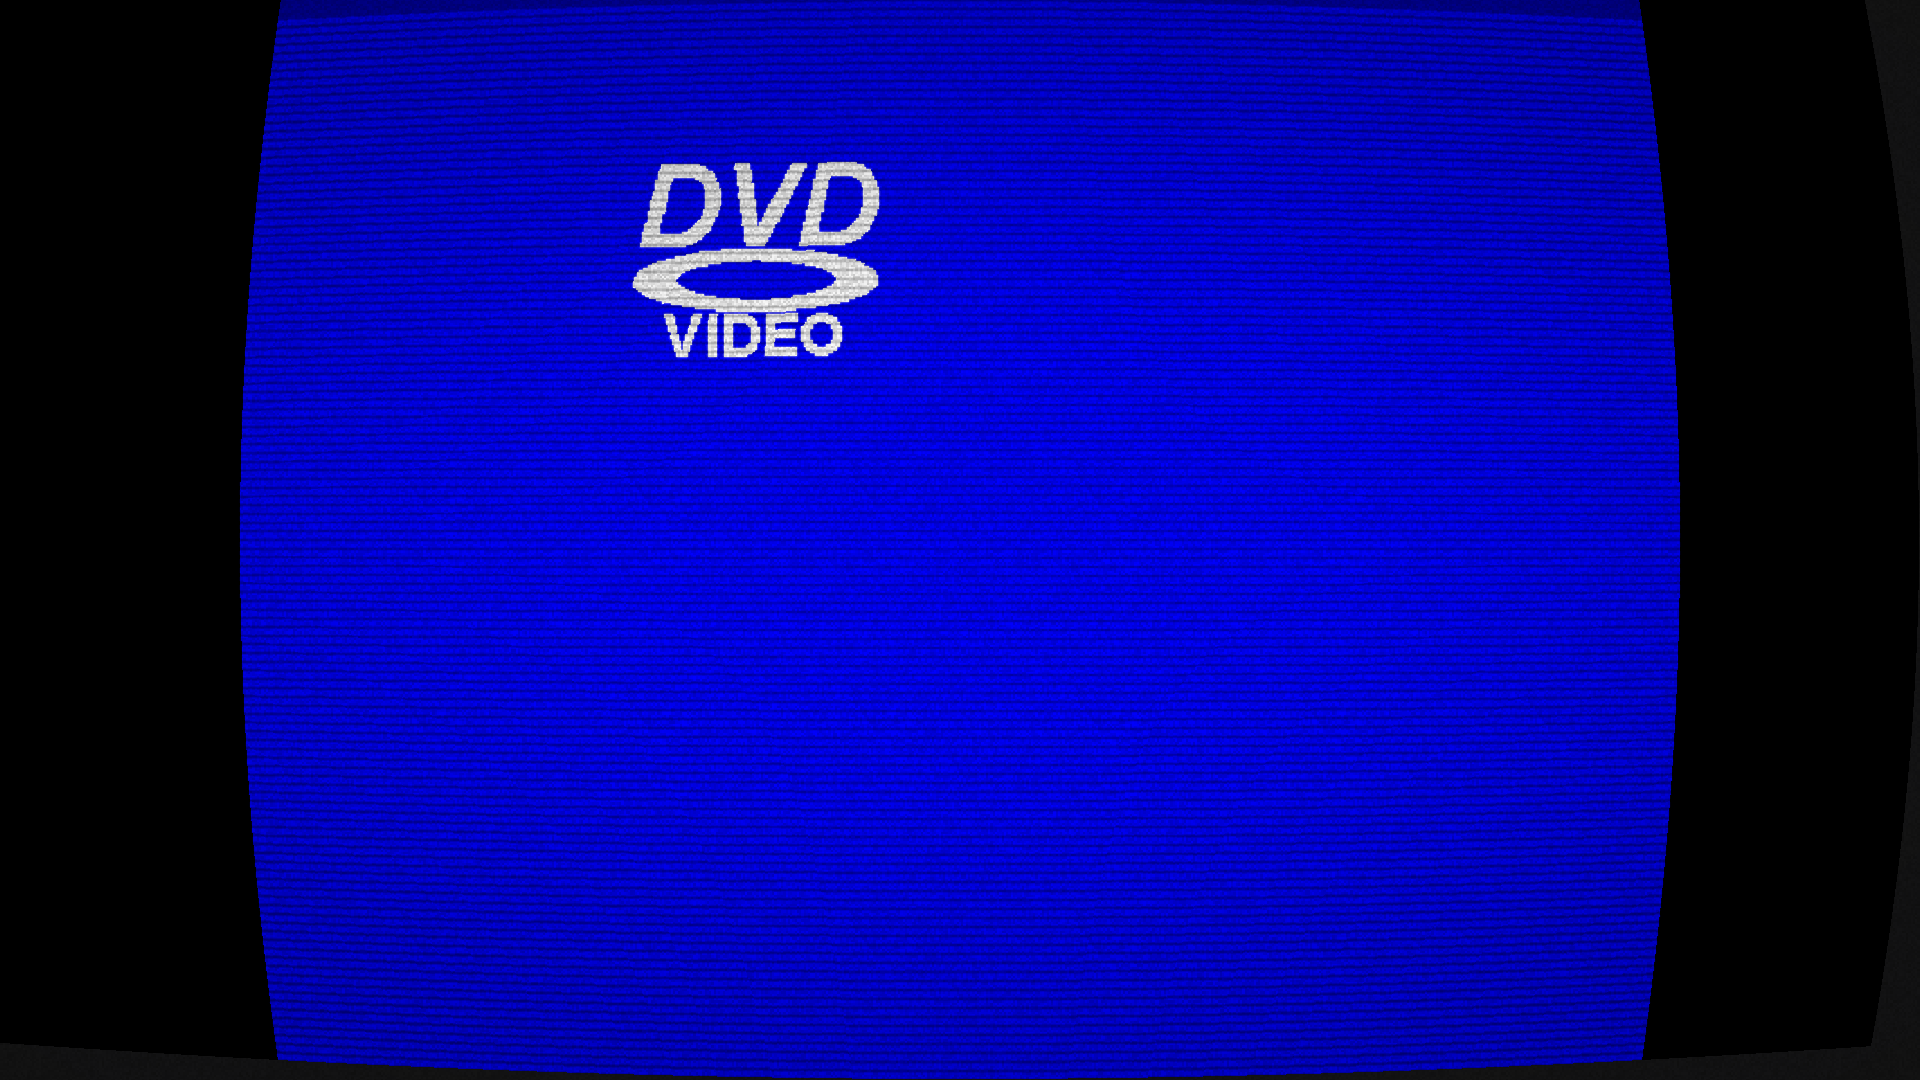 DVD -ROM Logo - The Perfect Meeting adventure of a DVD logo